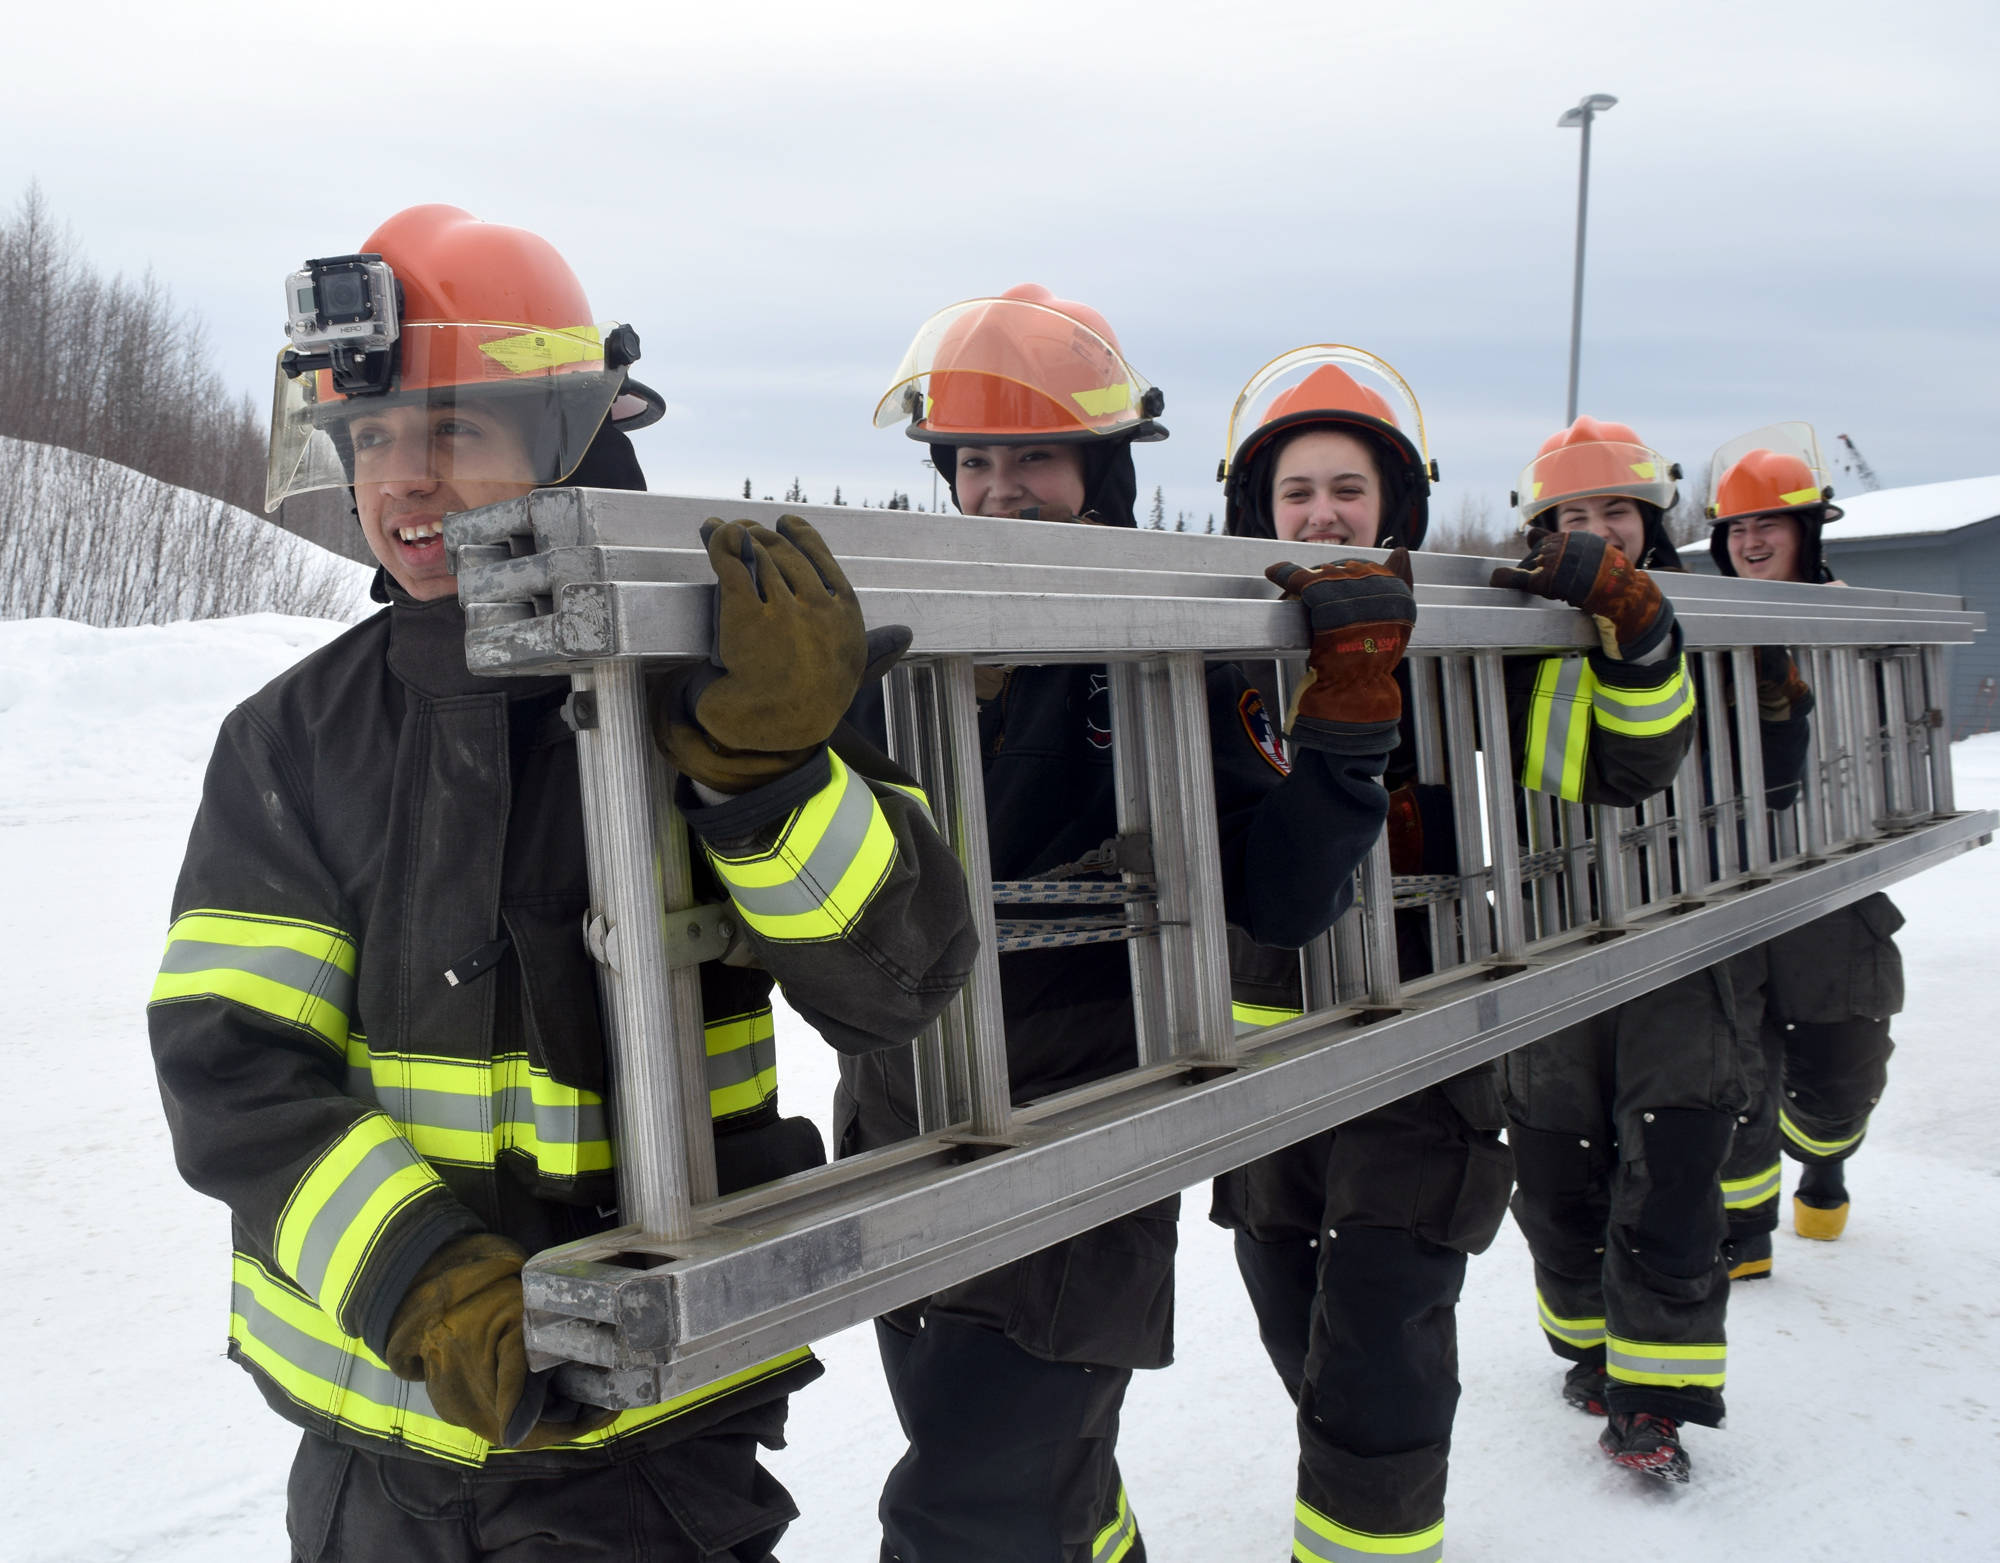 Joshua Diaz, a Kenai Central High School senior, leads his fellow students in a trianing exercise during Thursday’s basic firefighting academy at Nikiski Fire Station. (Photo by Kat Sorensen/Peninsula Clarion)